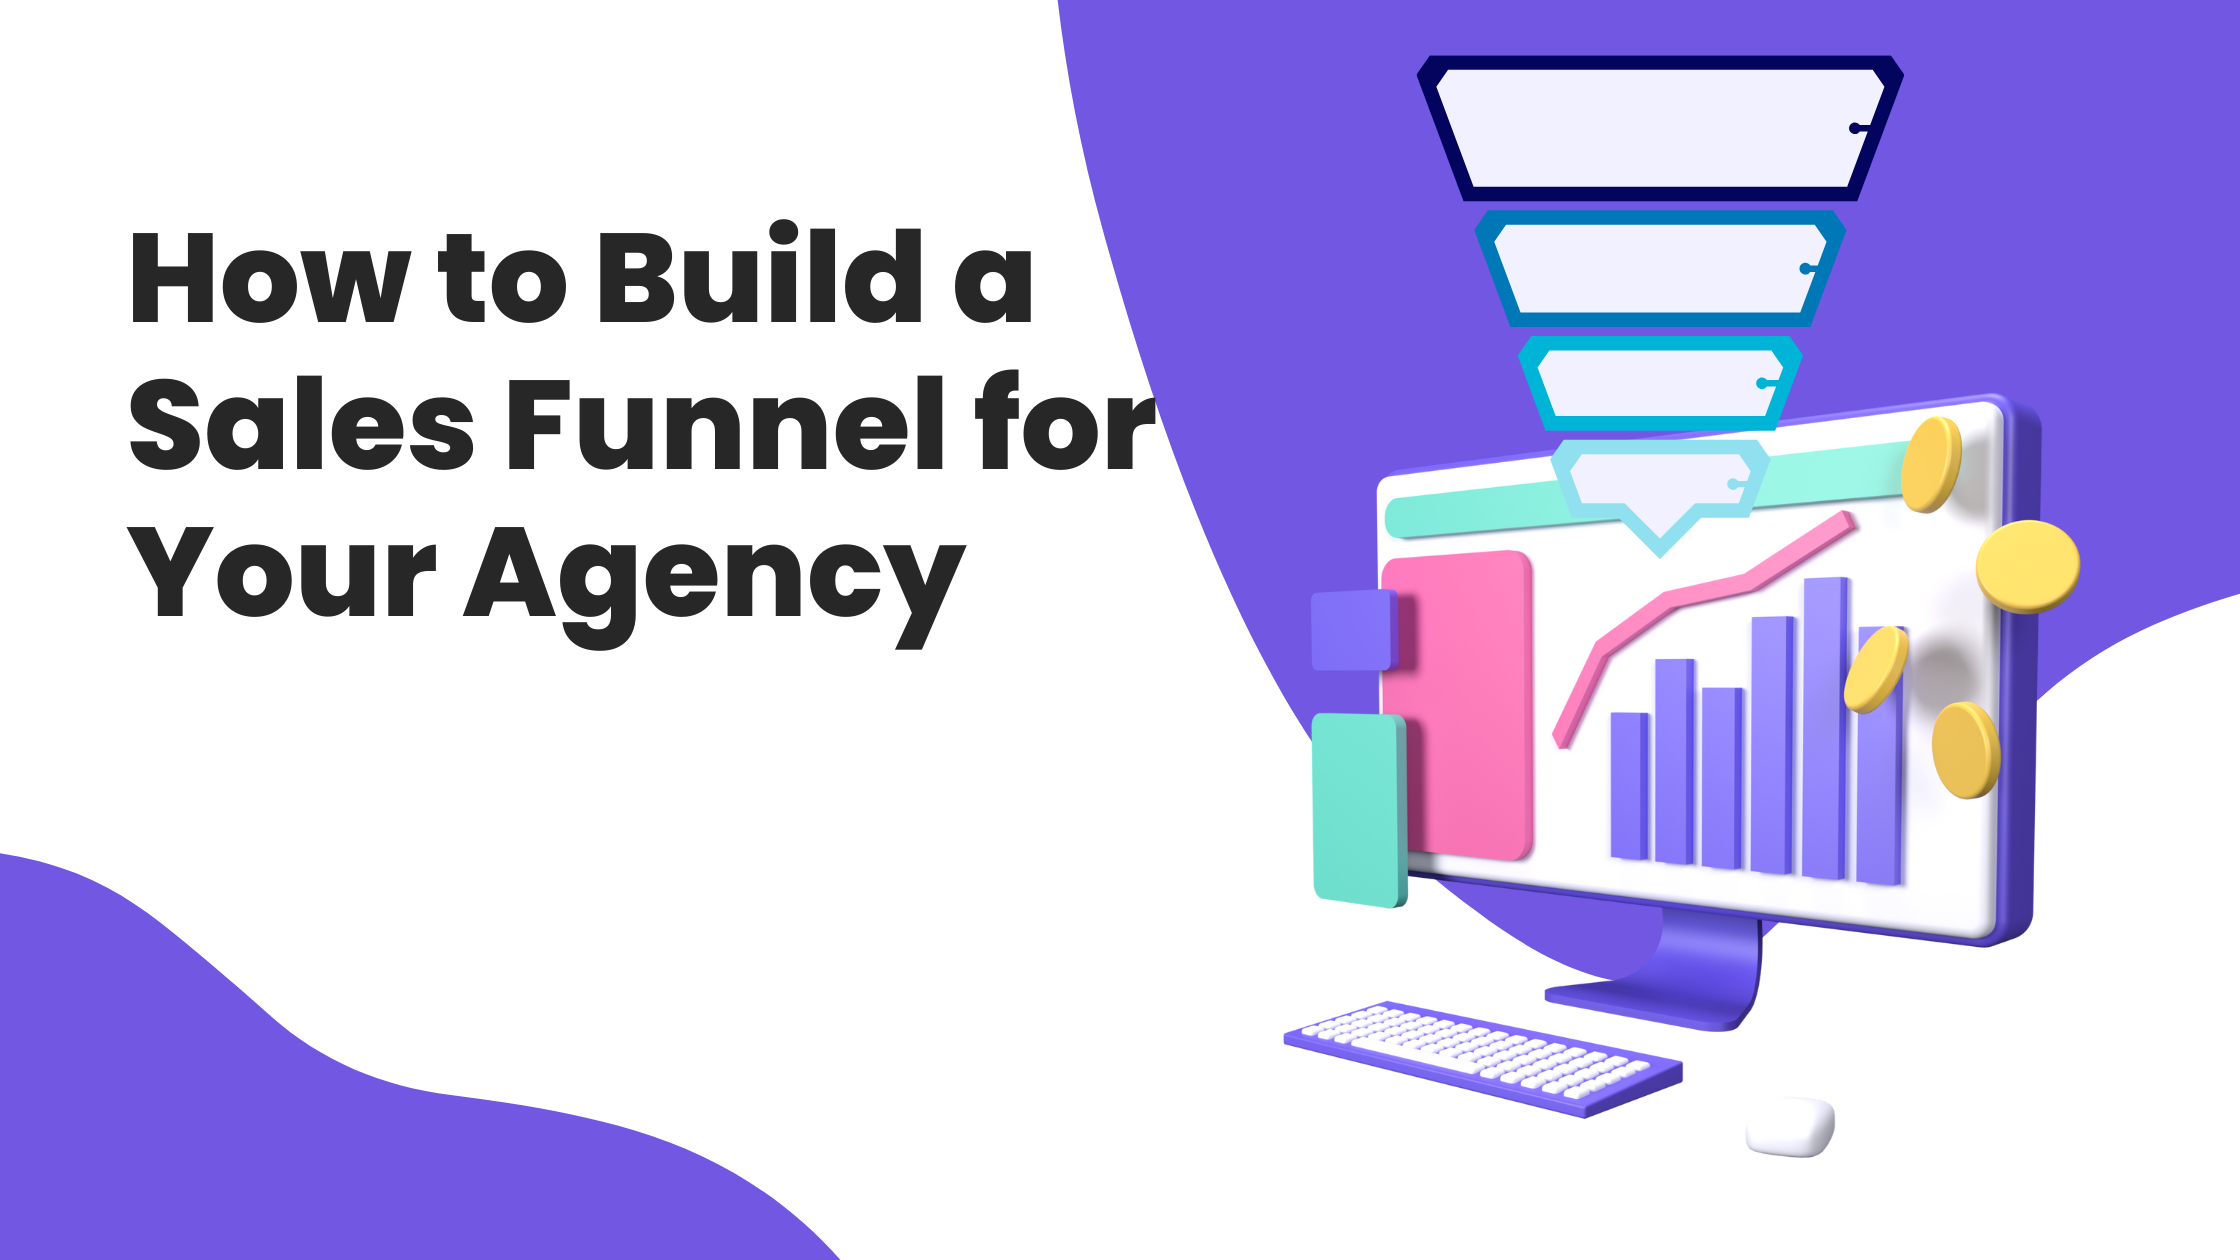 How to Build a Sales Funnel for Your Agency